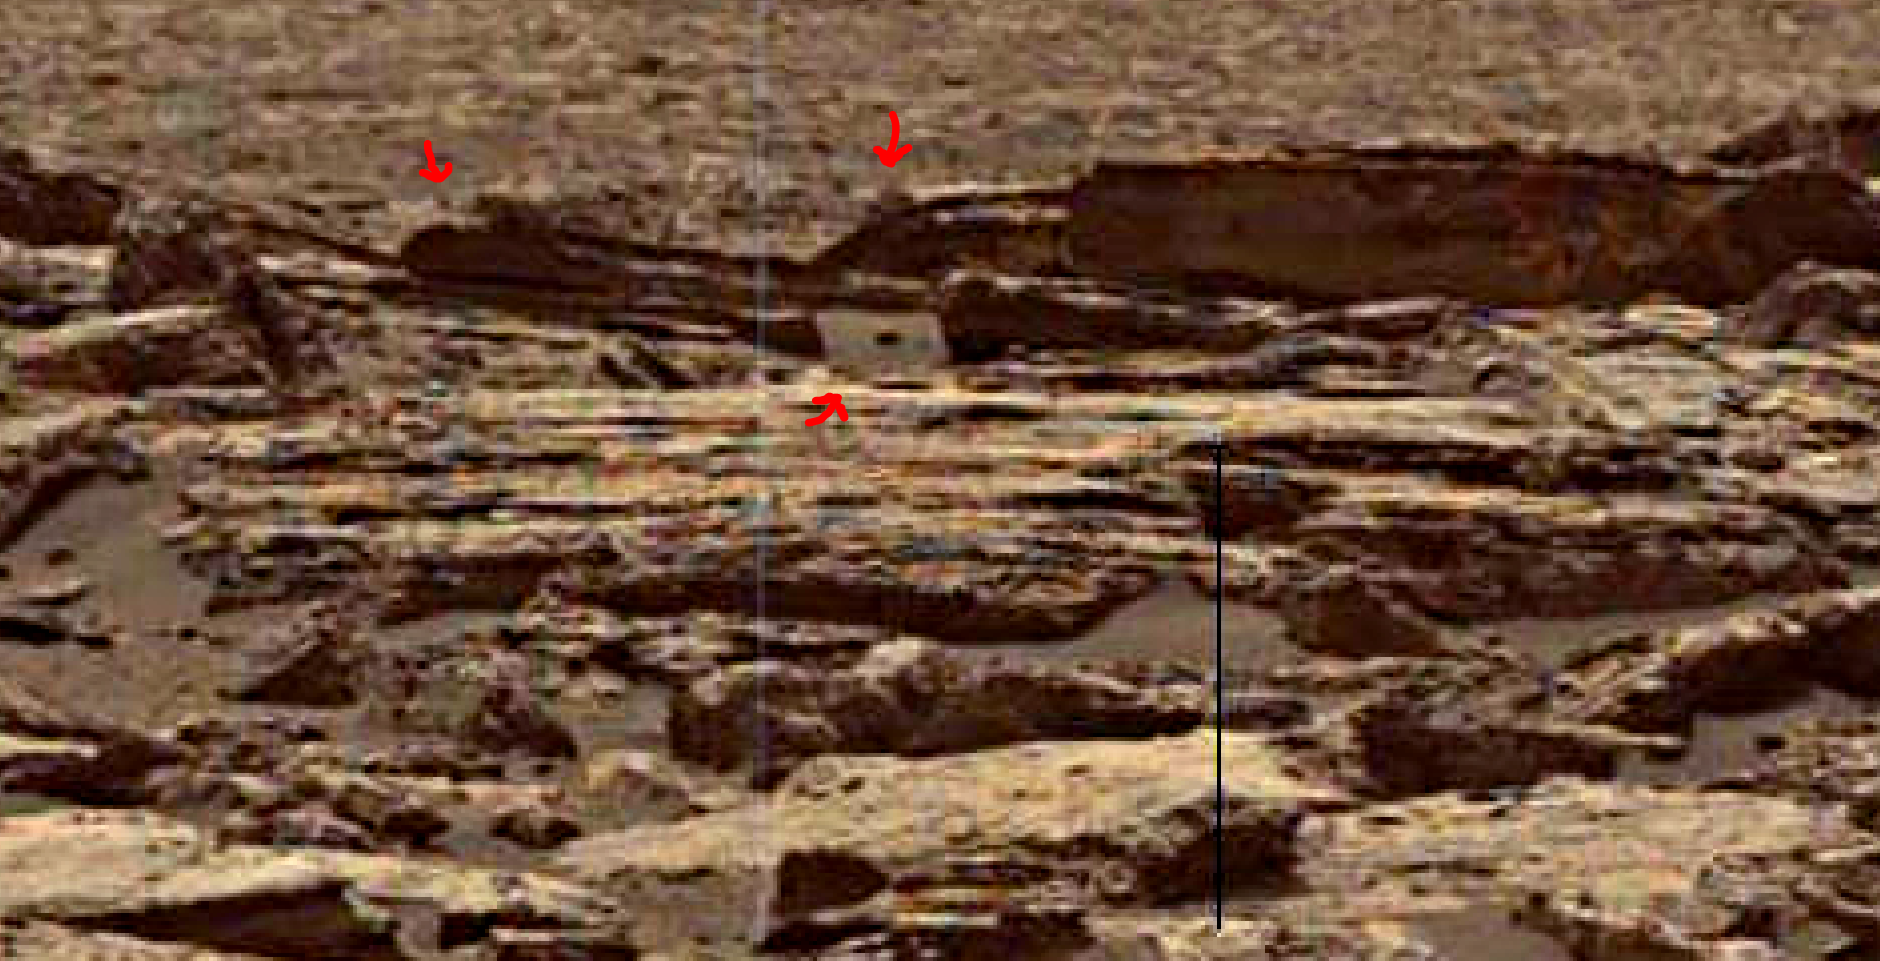 mars-sol-1485-anomaly-artifacts-17-was-life-on-mars